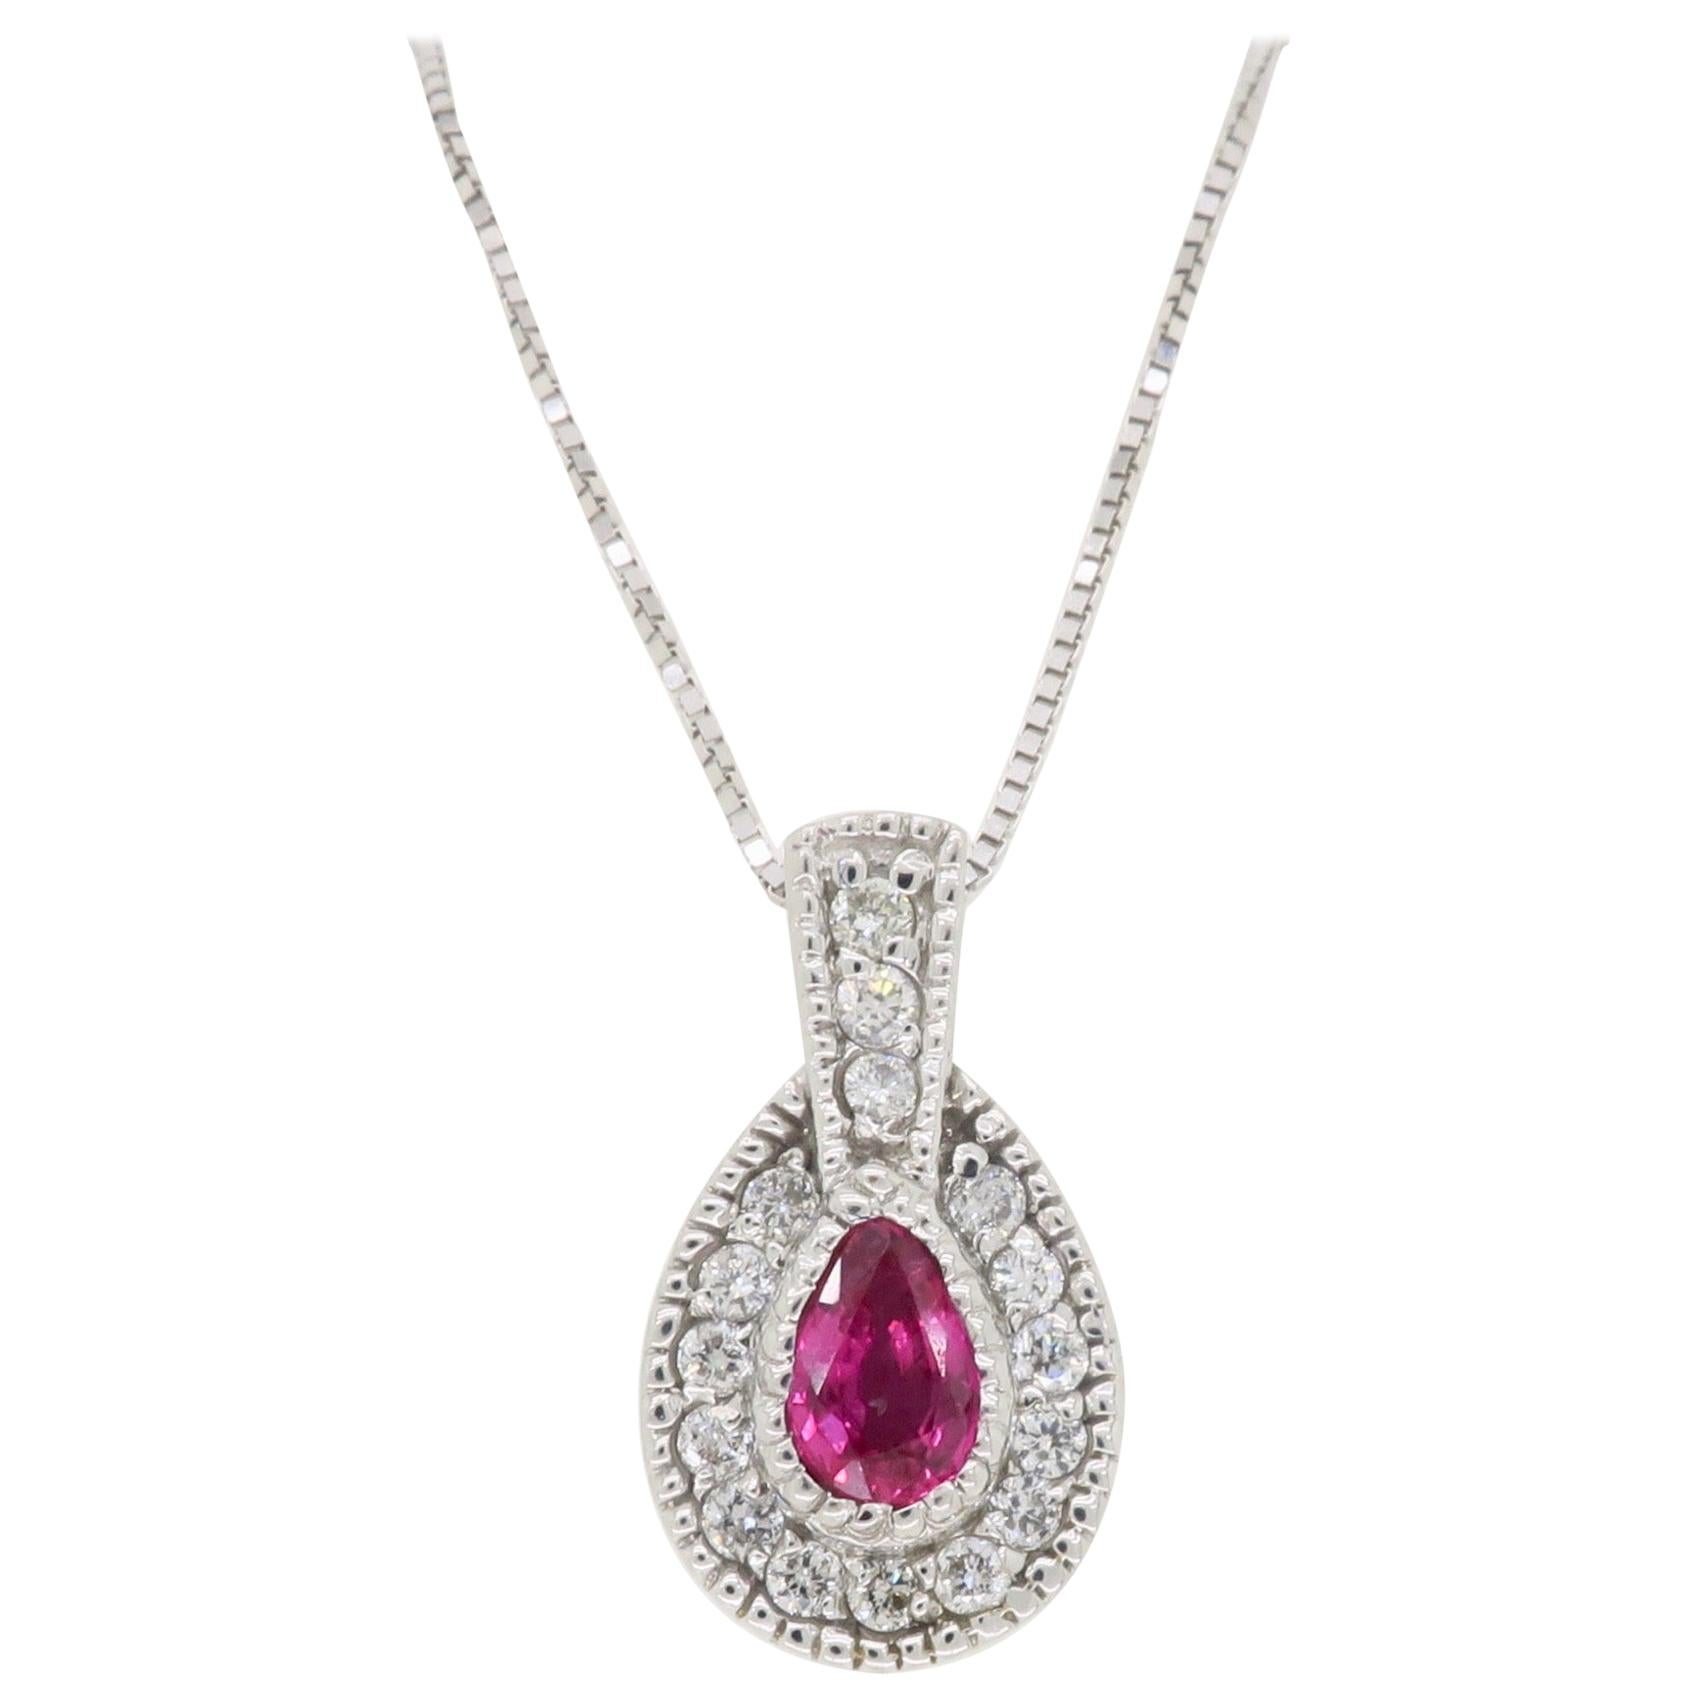 Pear Shaped Ruby and Diamond Halo Pendant Necklace